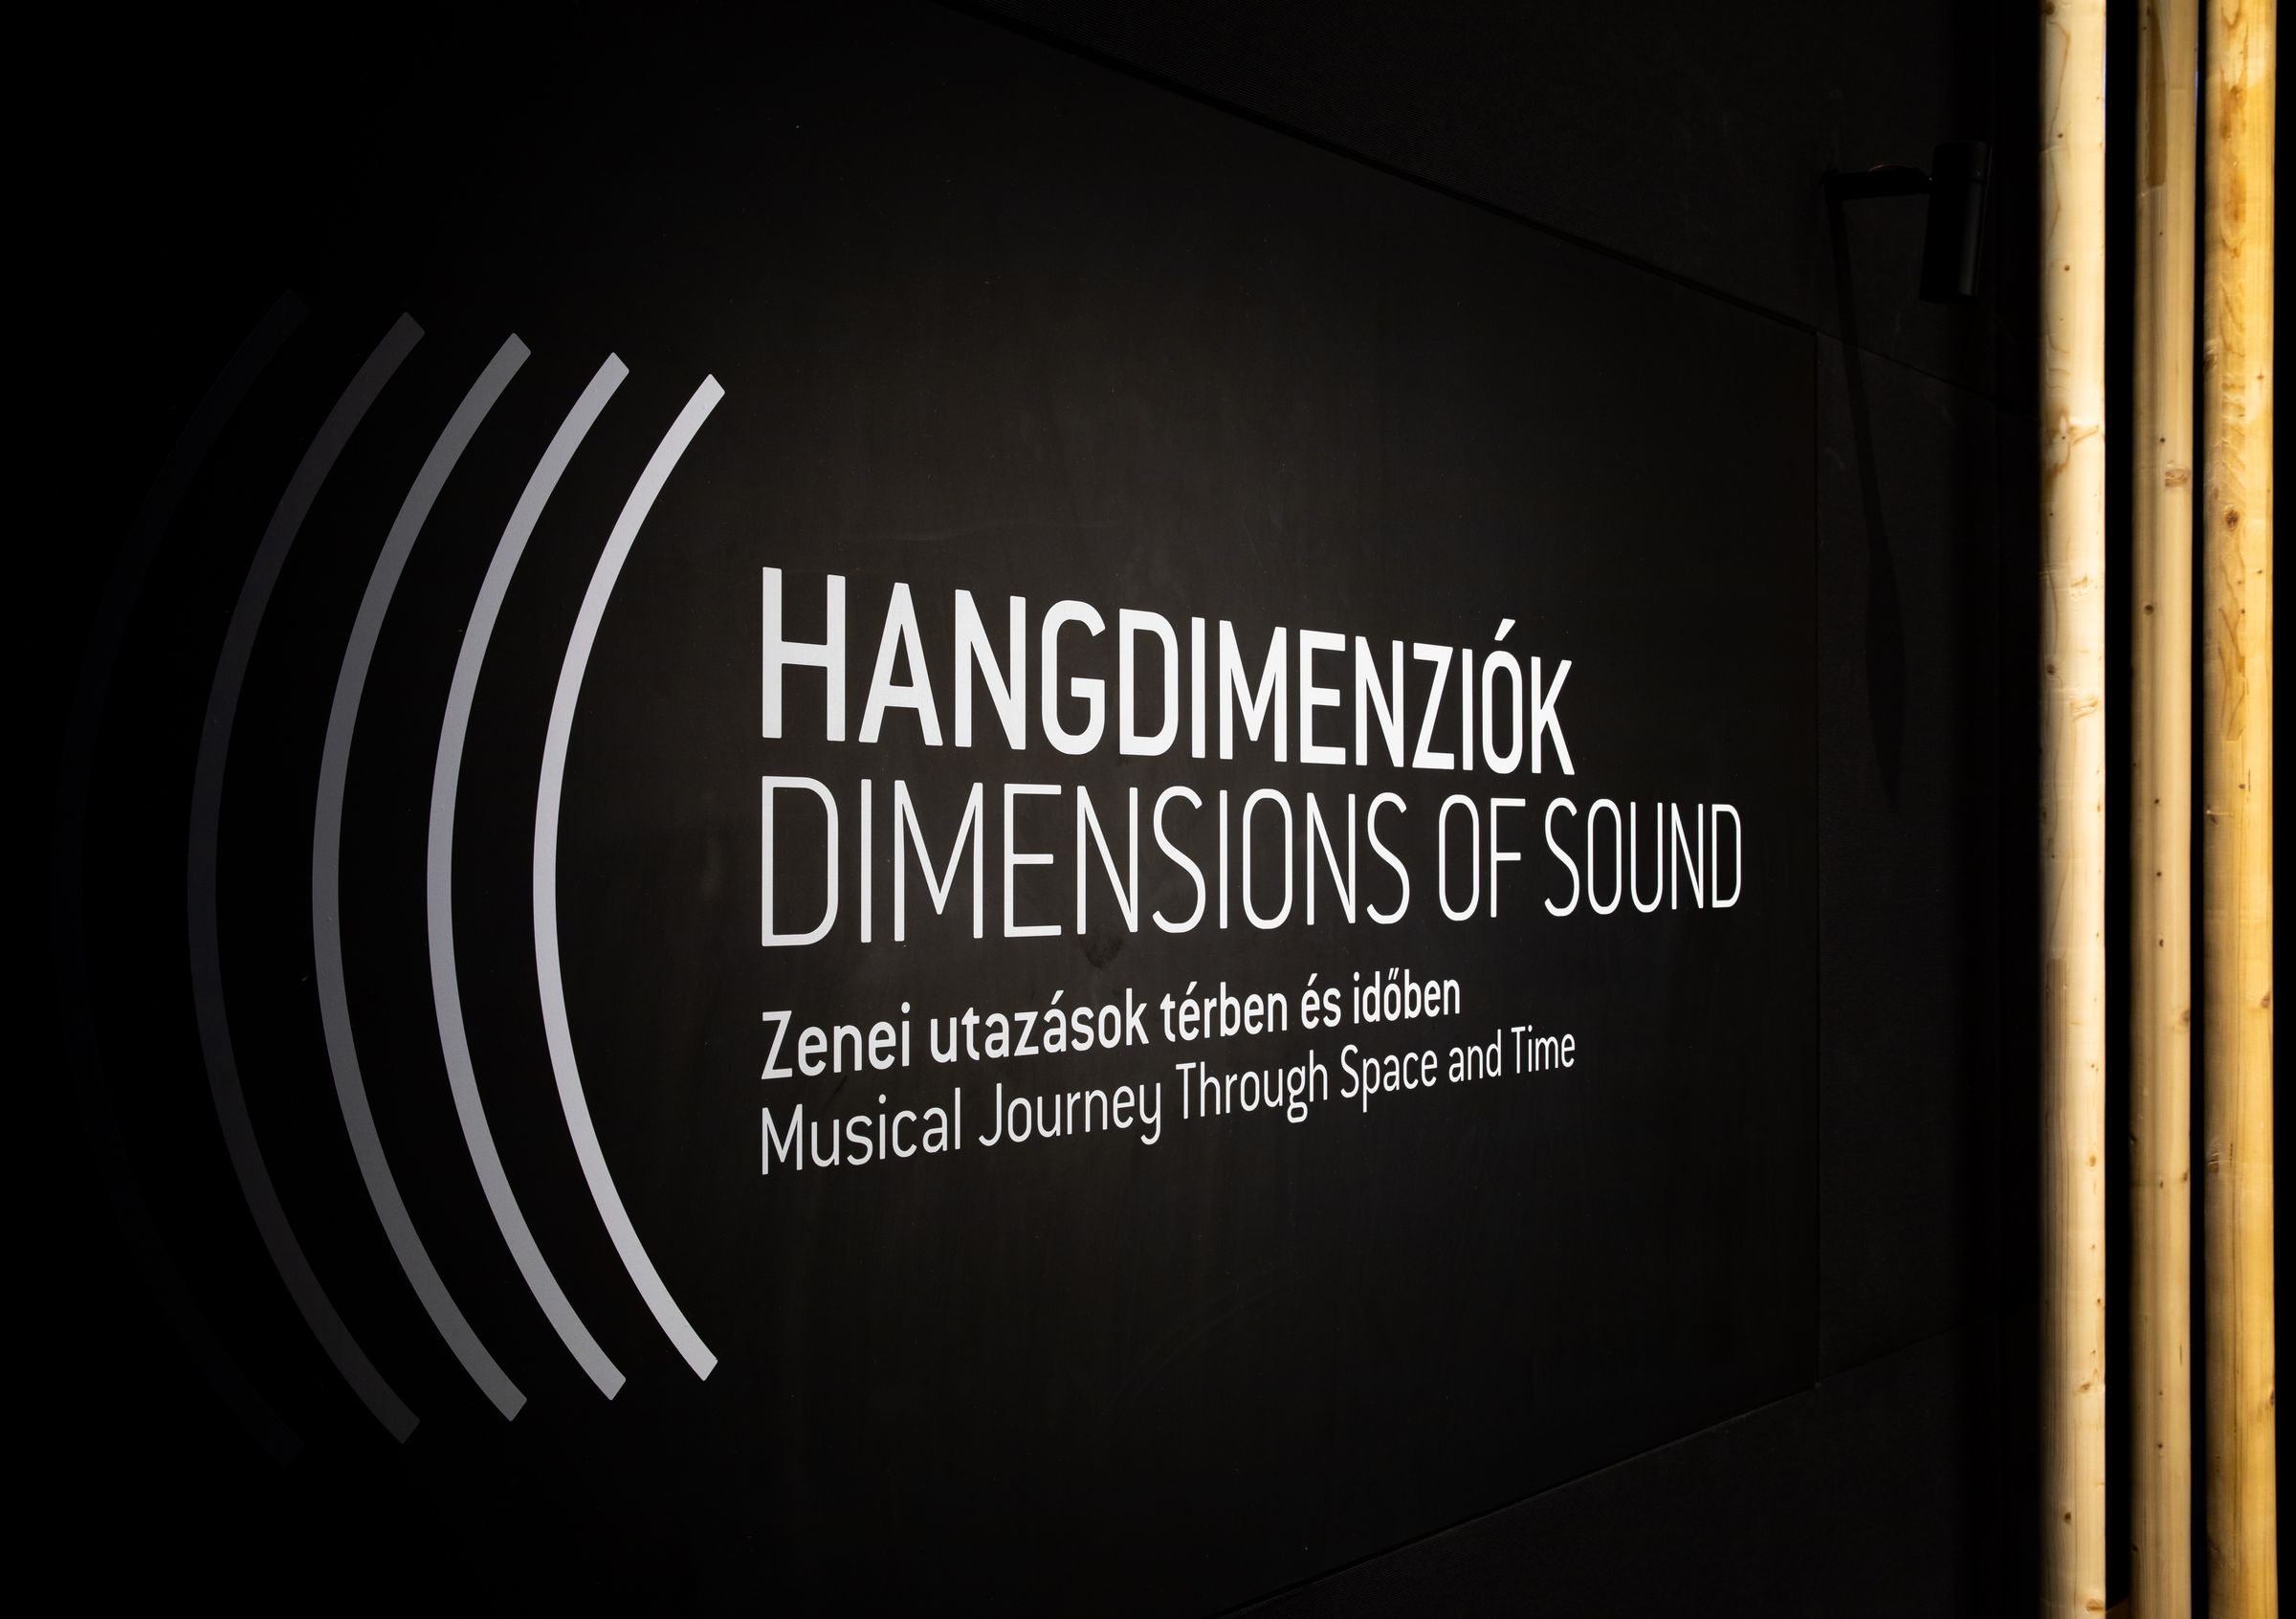 Dimensions of Sound - Musical Journey Through Space and Time